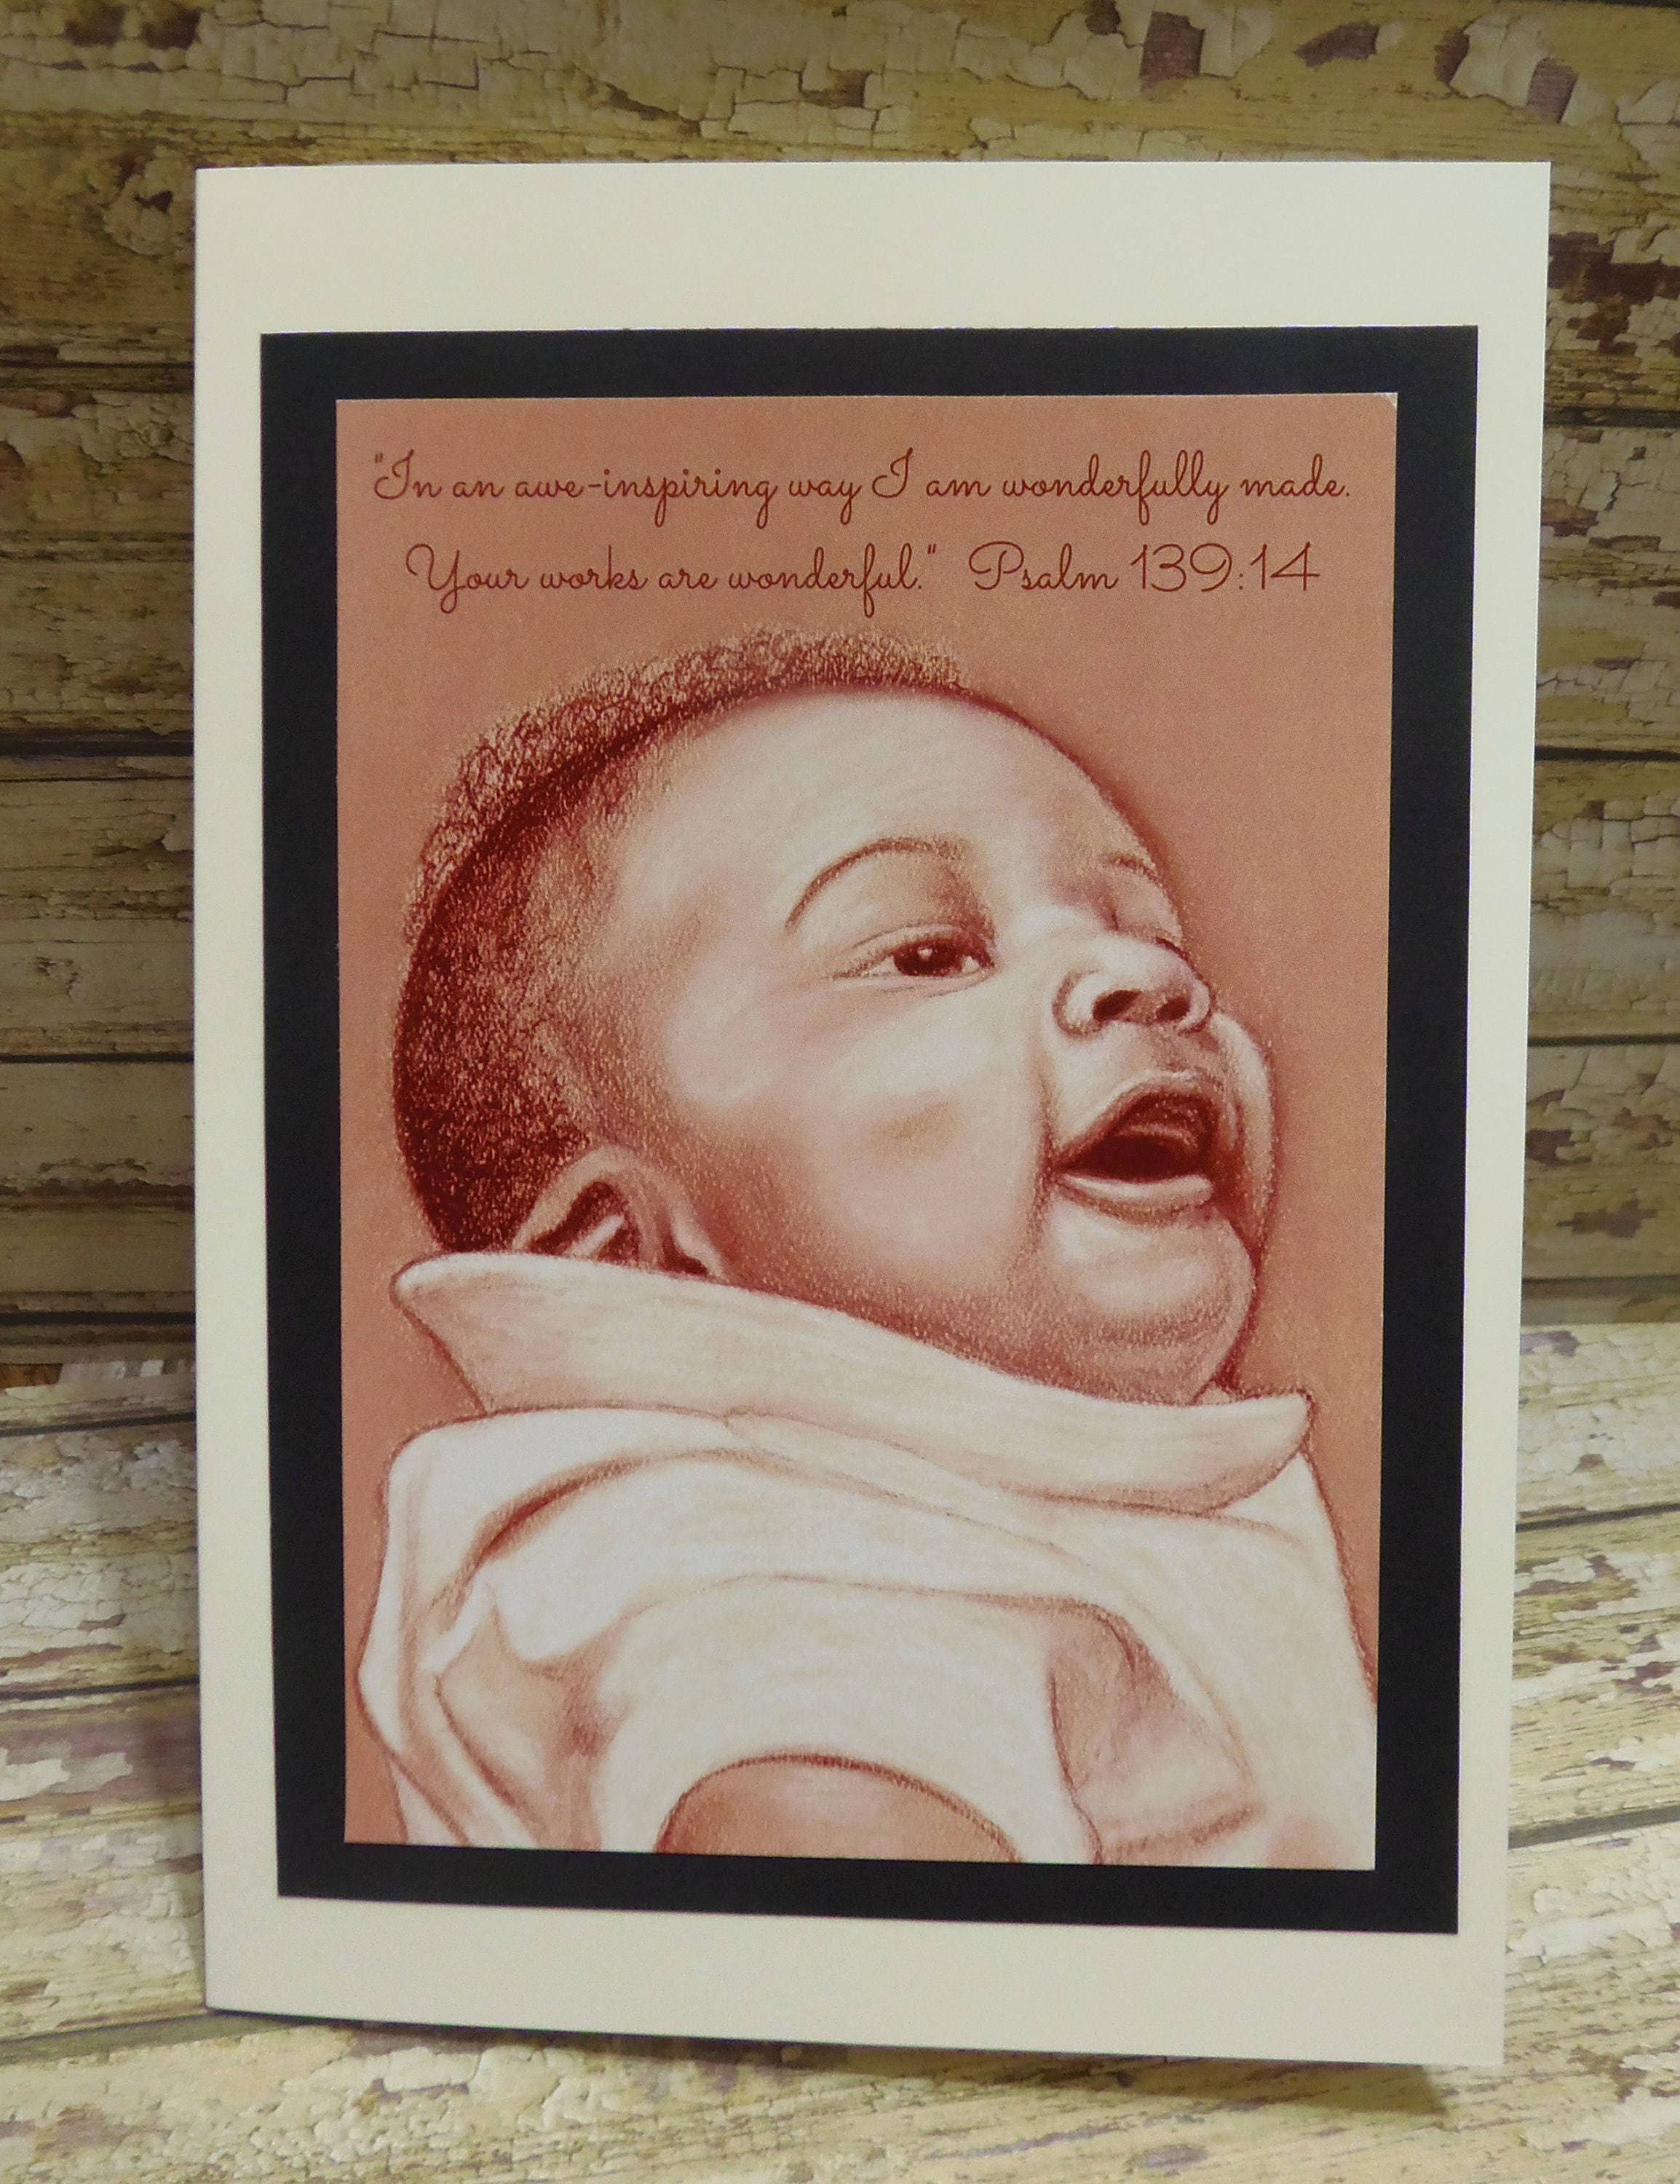 Baby Shower Greeting Card with Scripture In an awe-inspiring | Etsy